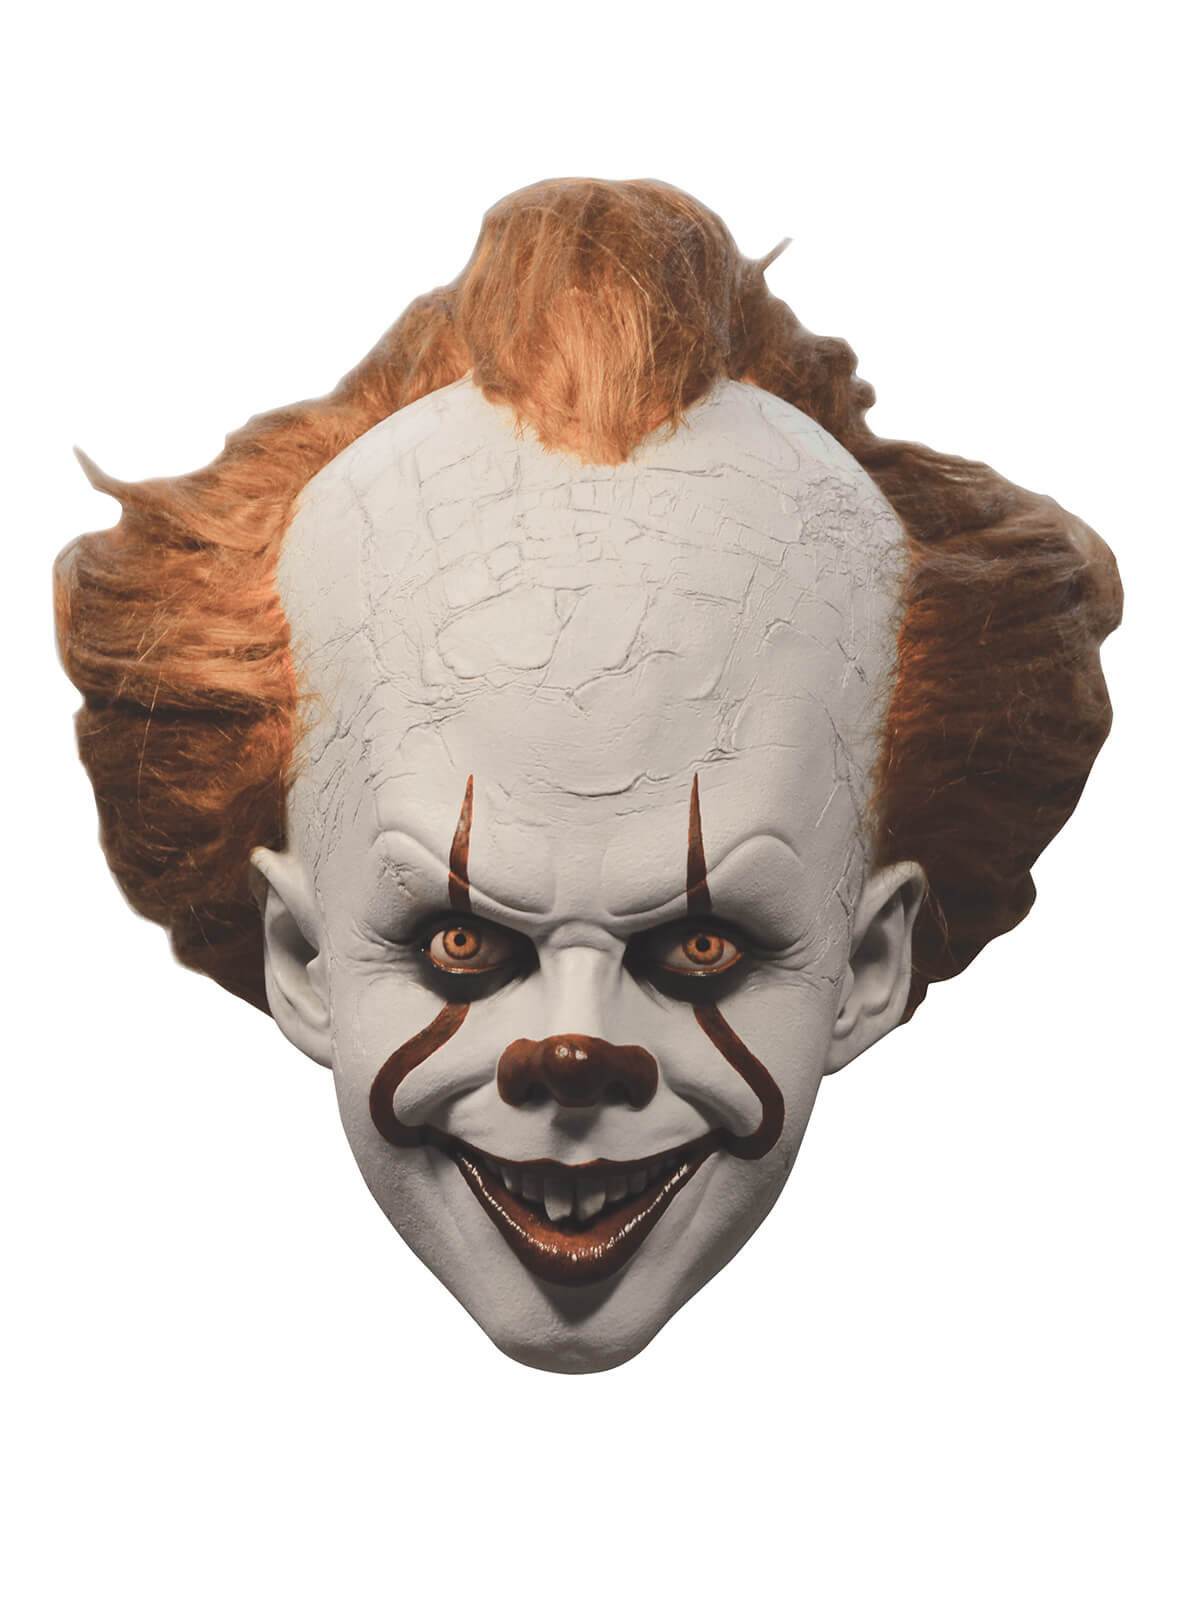 IT - Pennywise Deluxe Mask